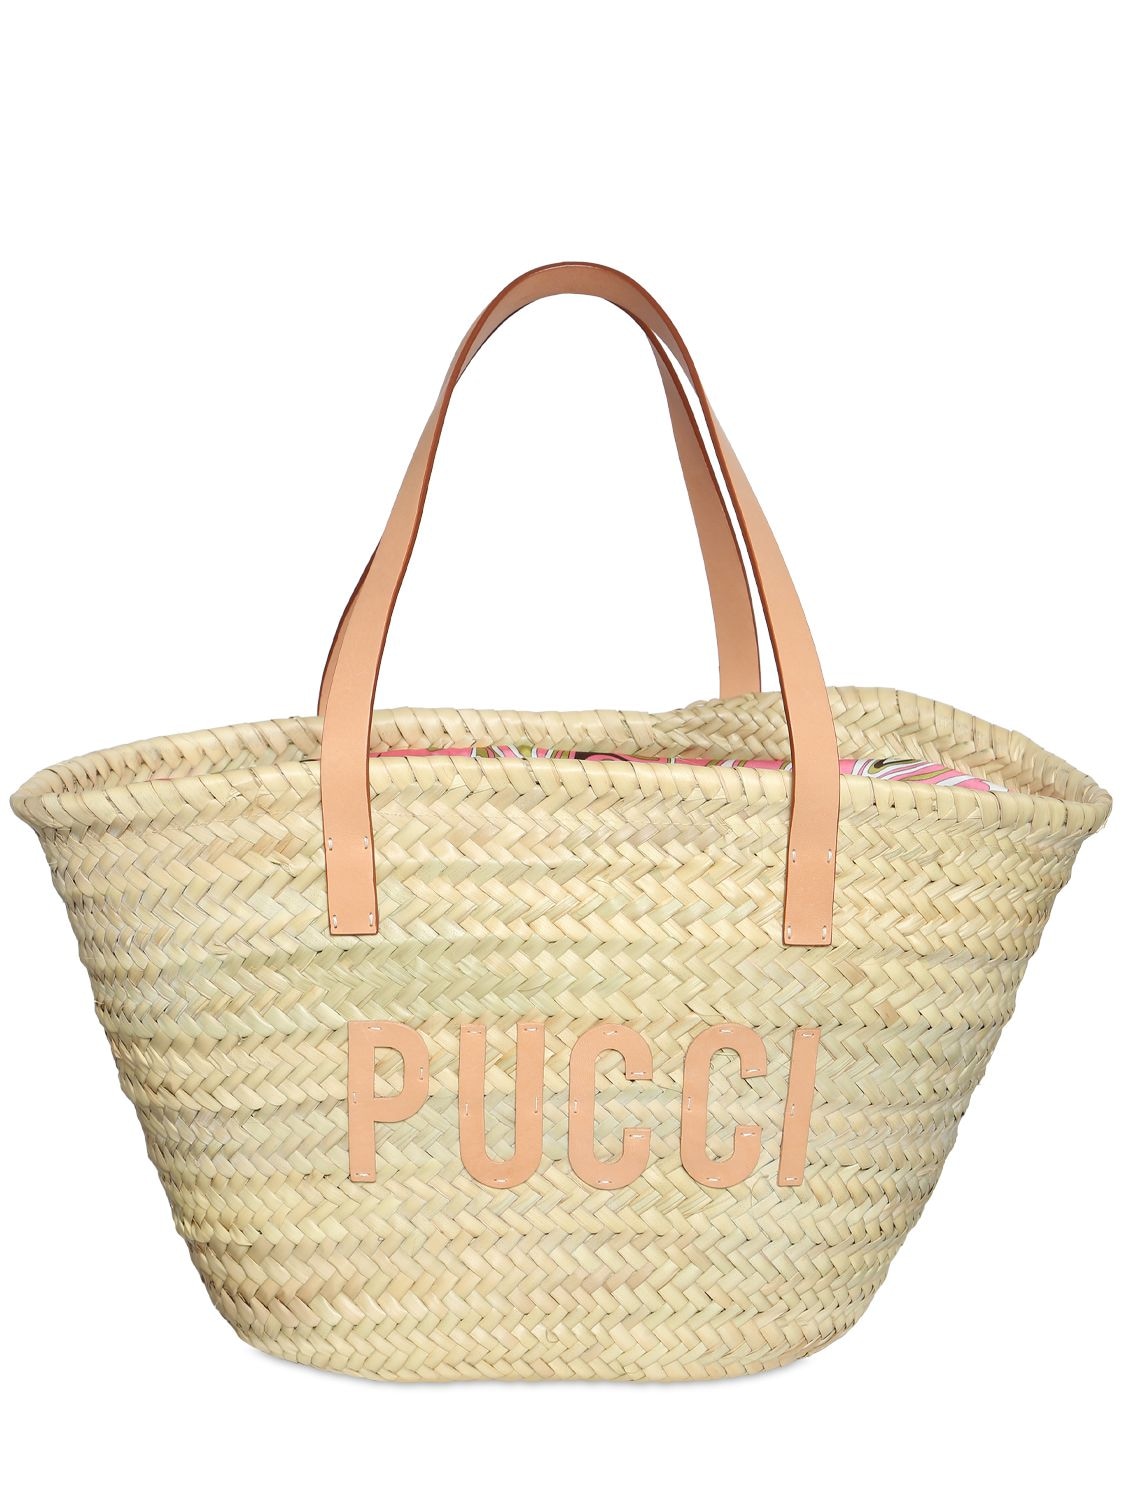 Straw & Leather Tote Bag